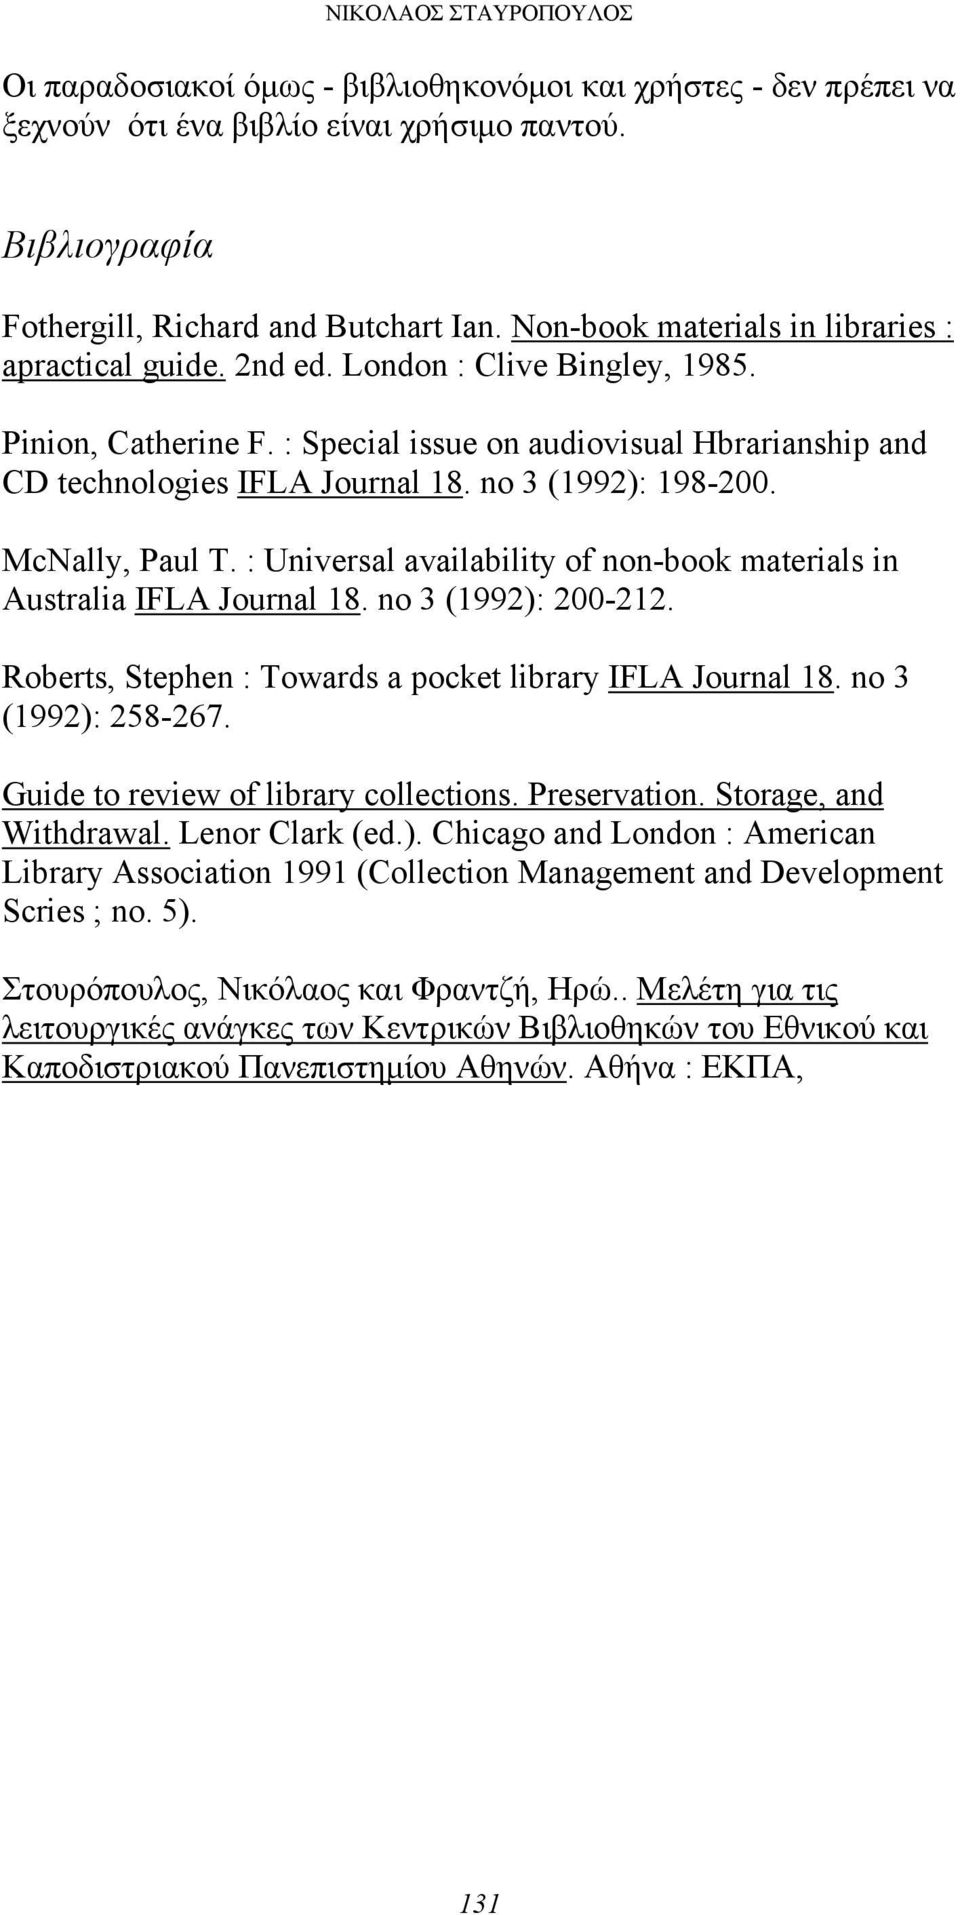 no 3 (1992): 198-200. McNally, Paul T. : Universal availability of non-book materials in Australia IFLA Journal 18. no 3 (1992): 200-212. Roberts, Stephen : Towards a pocket library IFLA Journal 18.